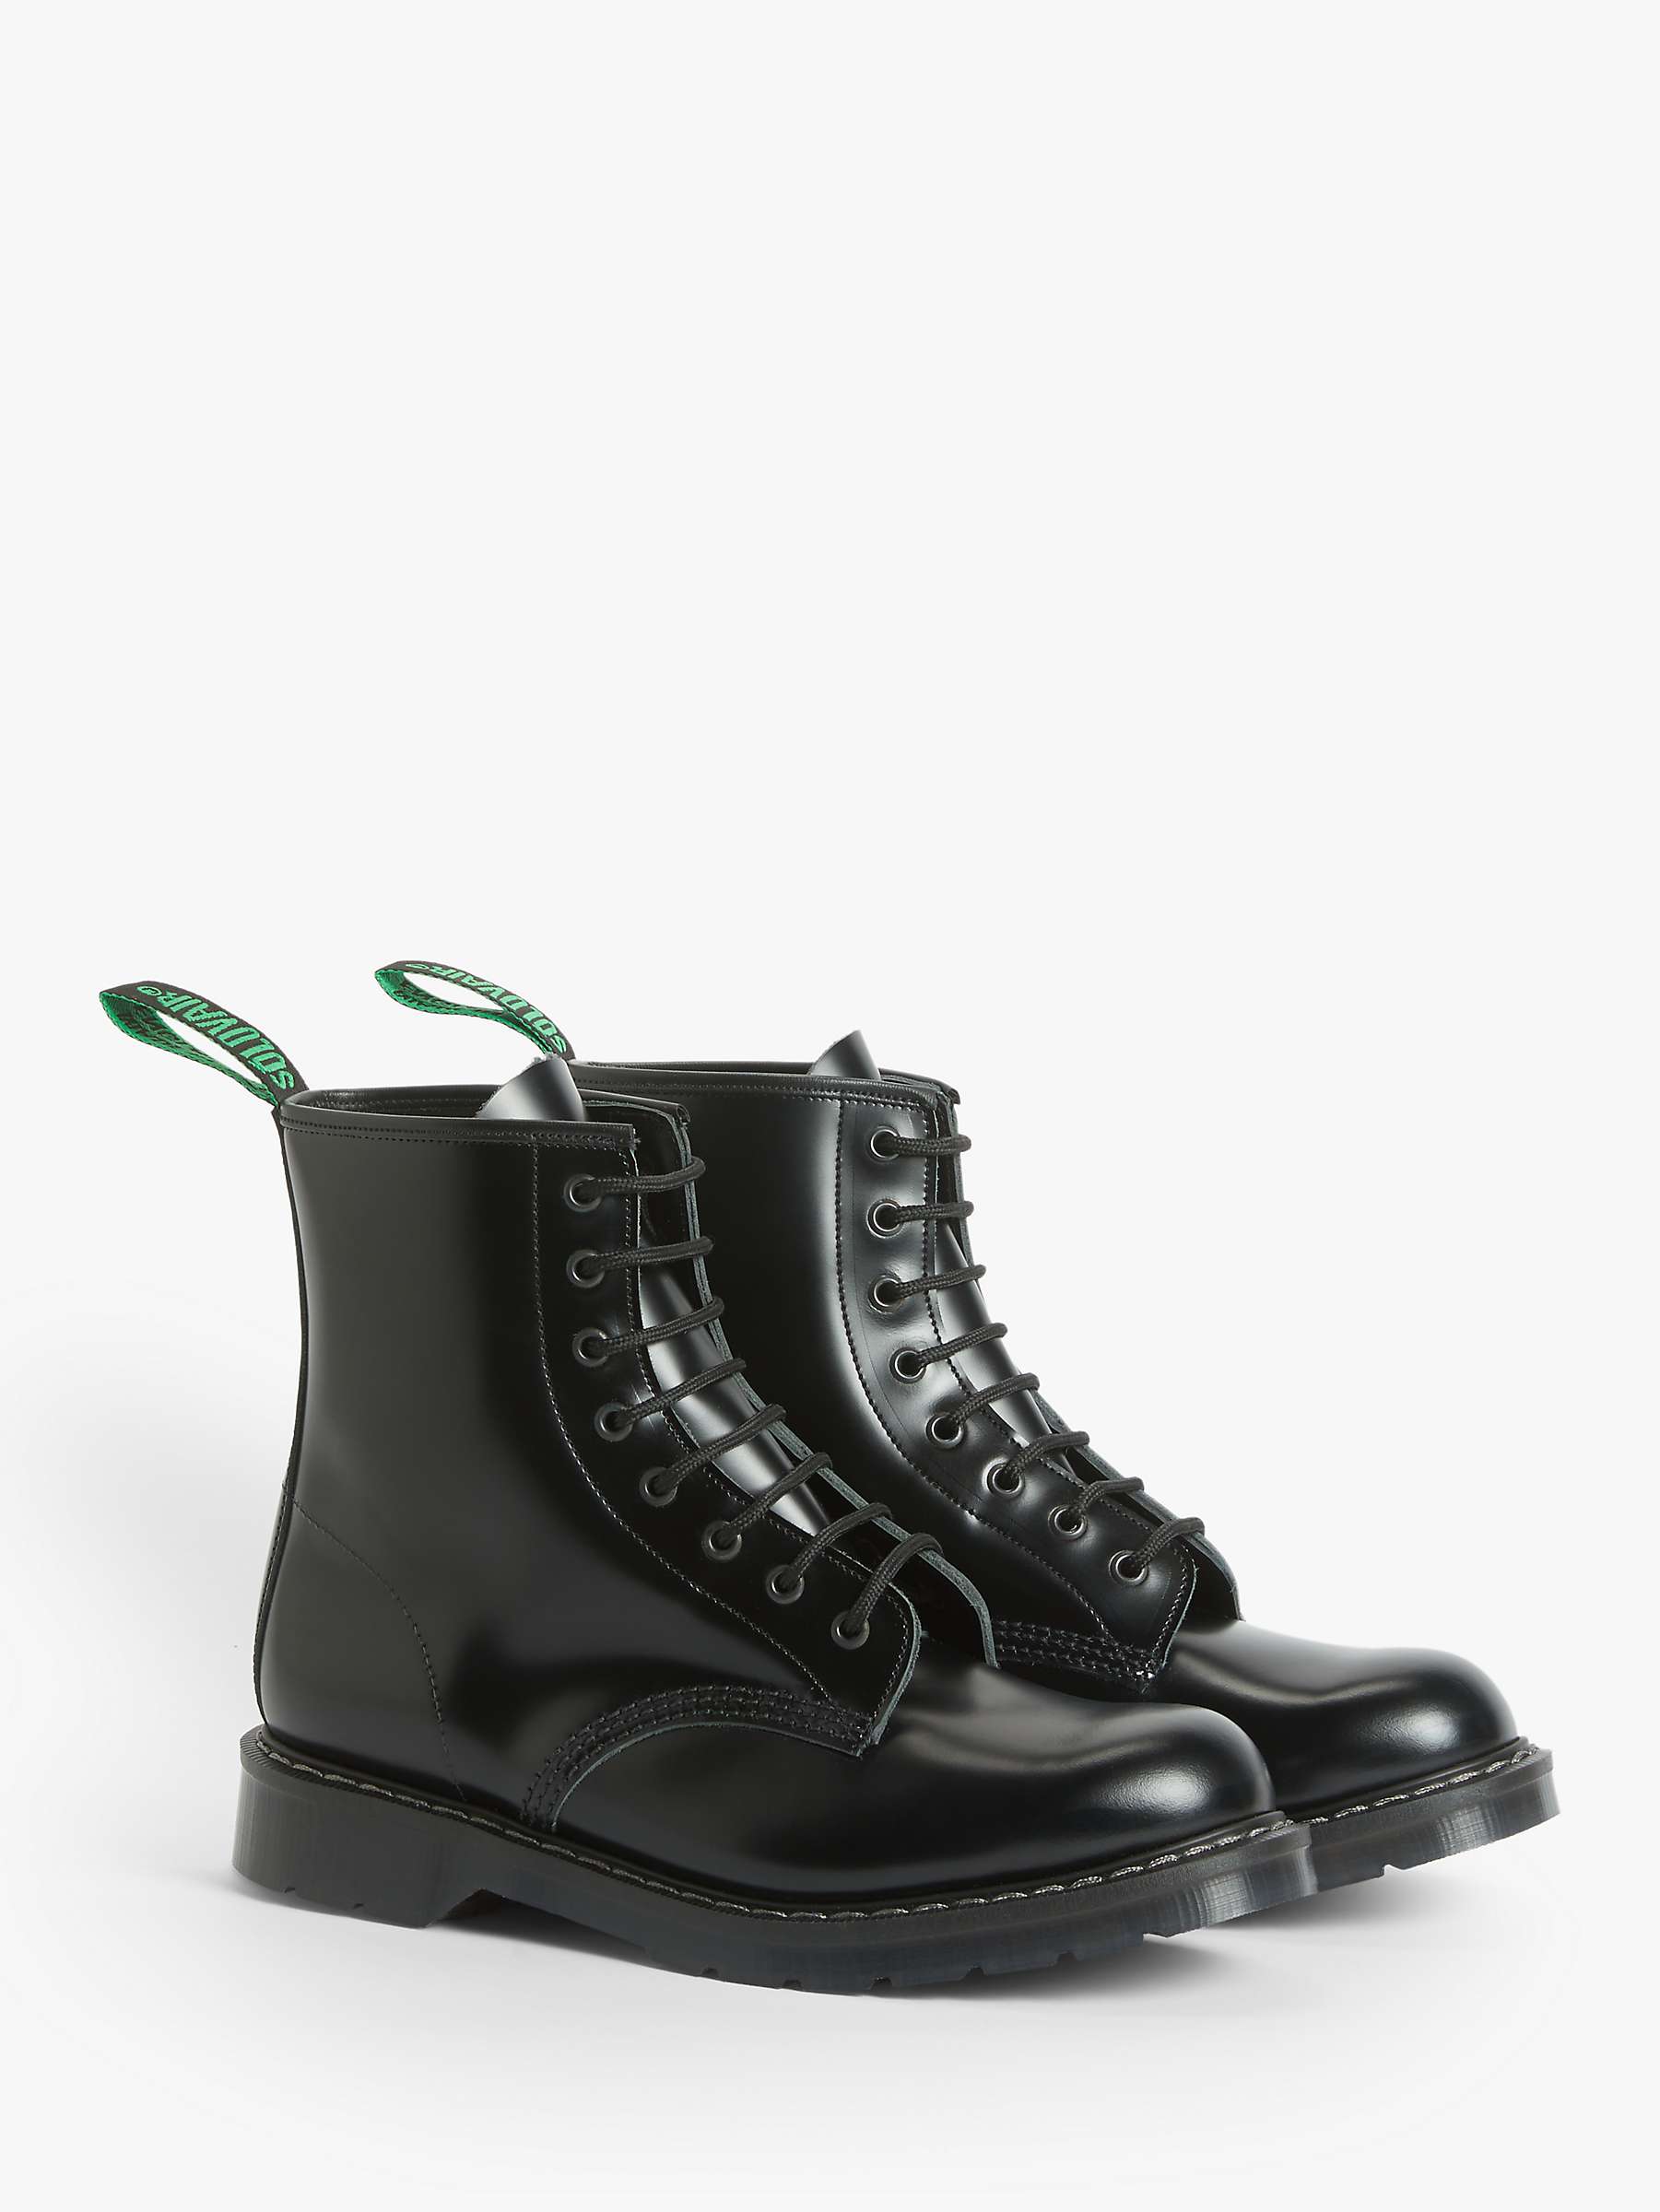 Buy Solovair Made in England 8 Eyelet Hi Shine Leather Derby Boots Online at johnlewis.com